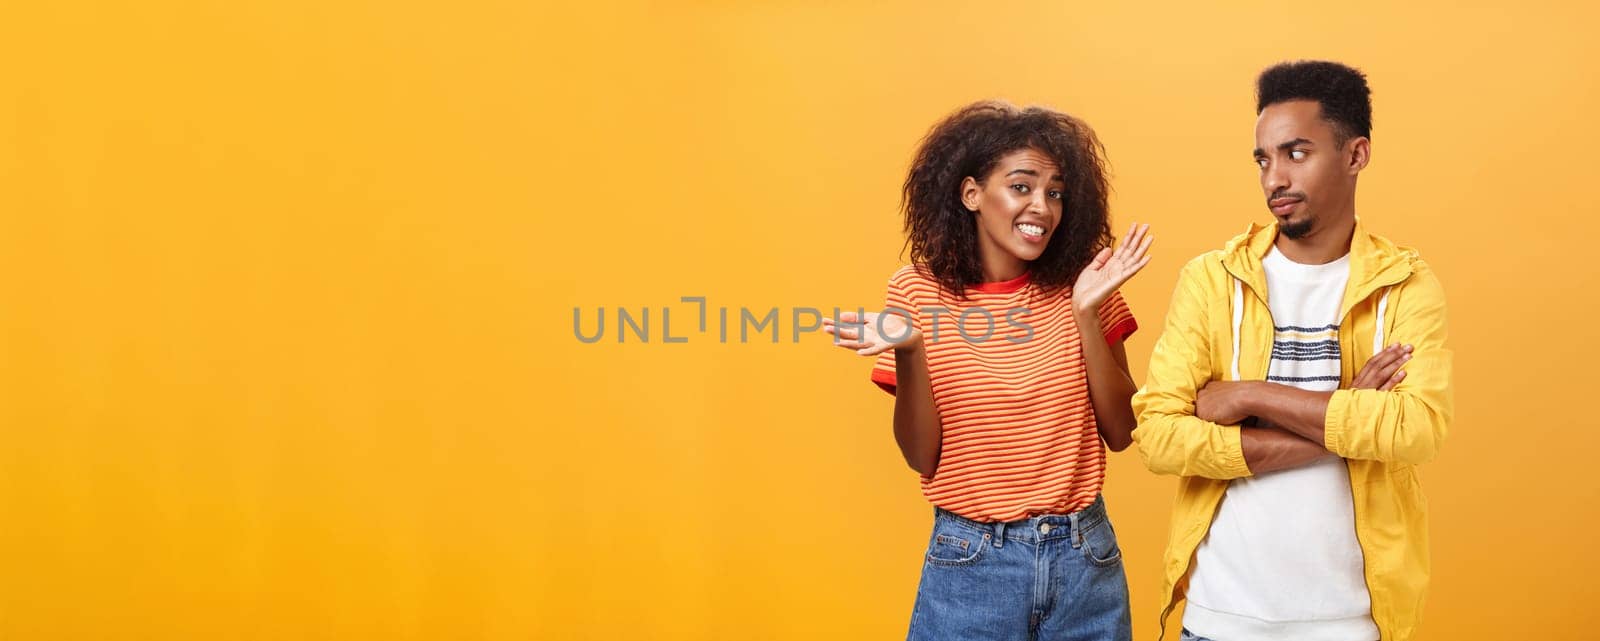 Guy thinks his friend weirdo making dumb thinks looking at cute girl with suspicious look crossing arms on chest raising eyebrow questioned while girlfriend saying sorry shrugging over orange wall by Benzoix